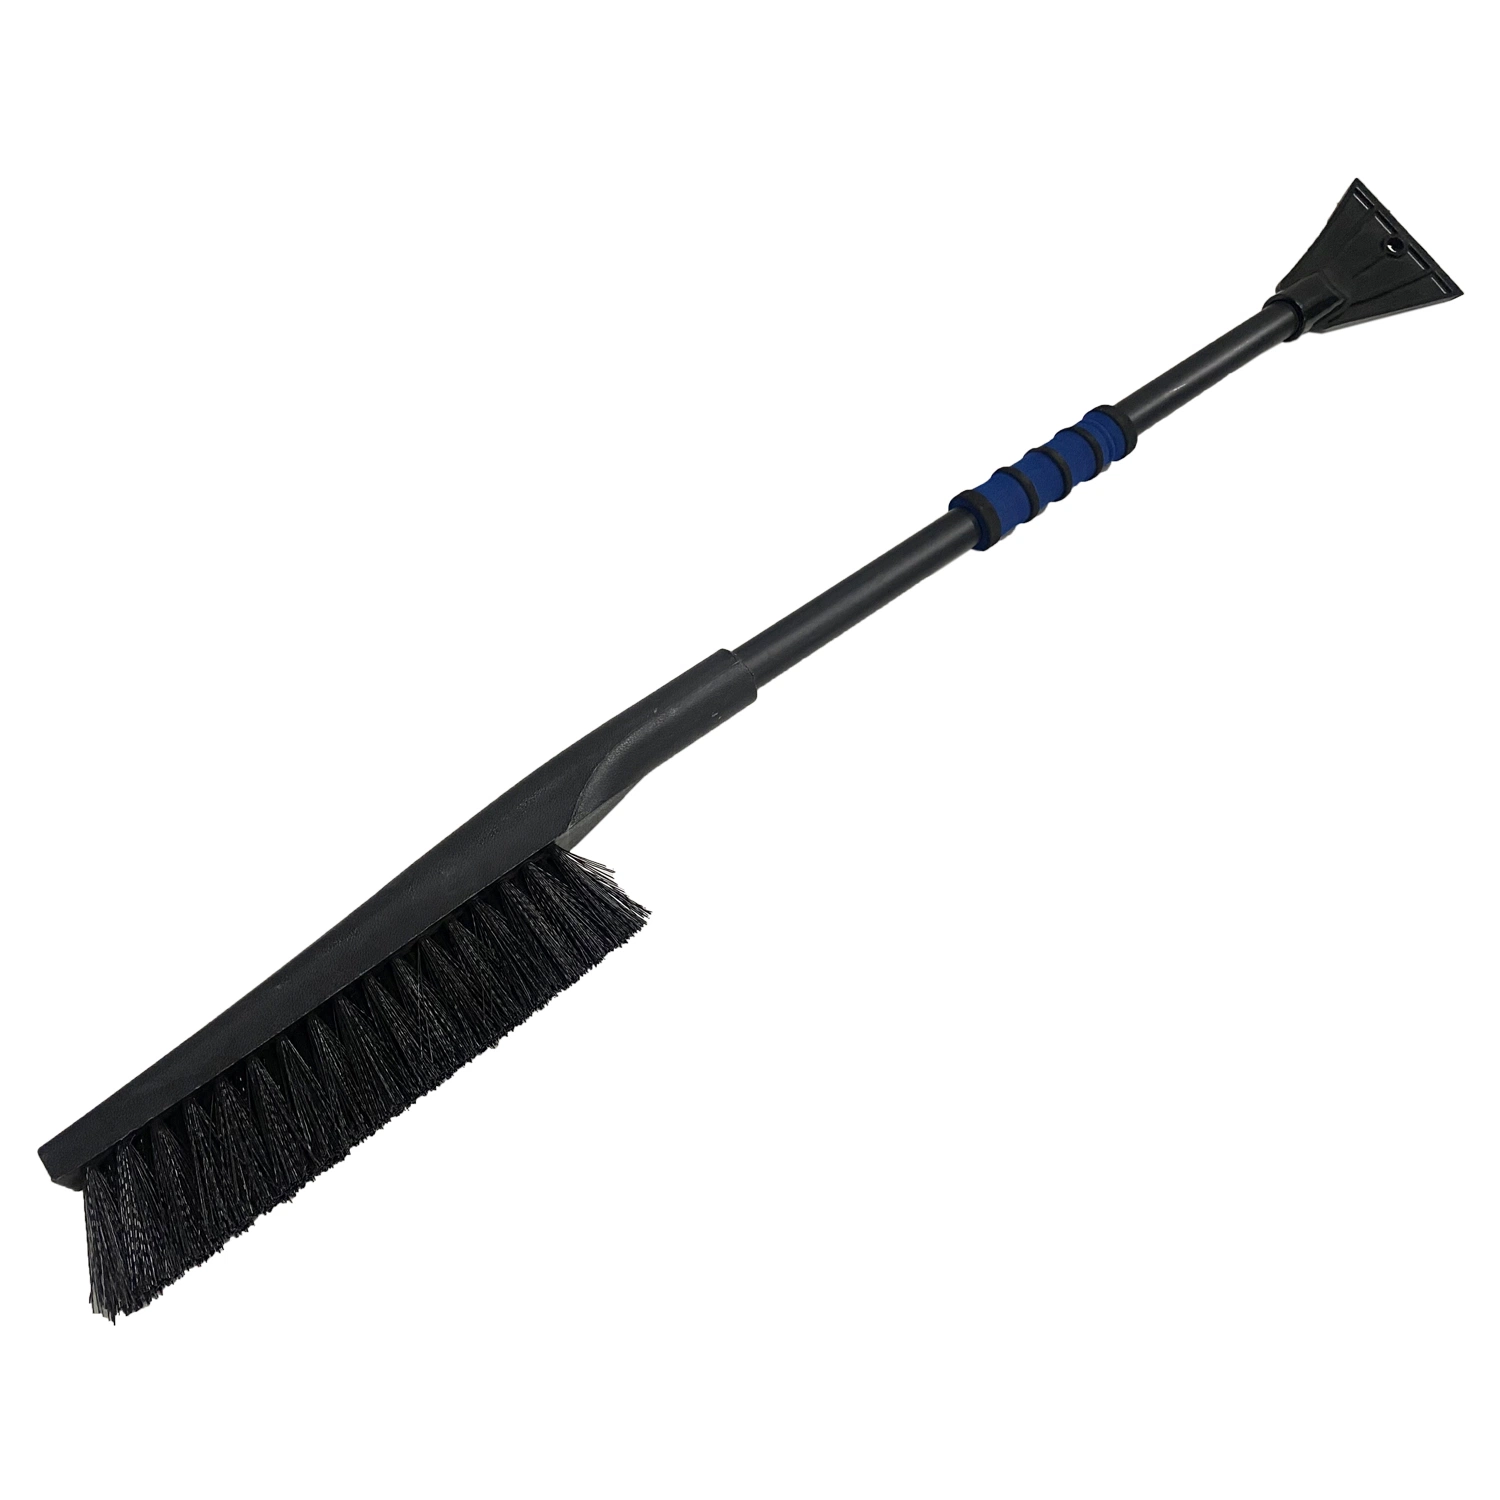 Long Handle Snow Brush North American Snow Brush with Scaper